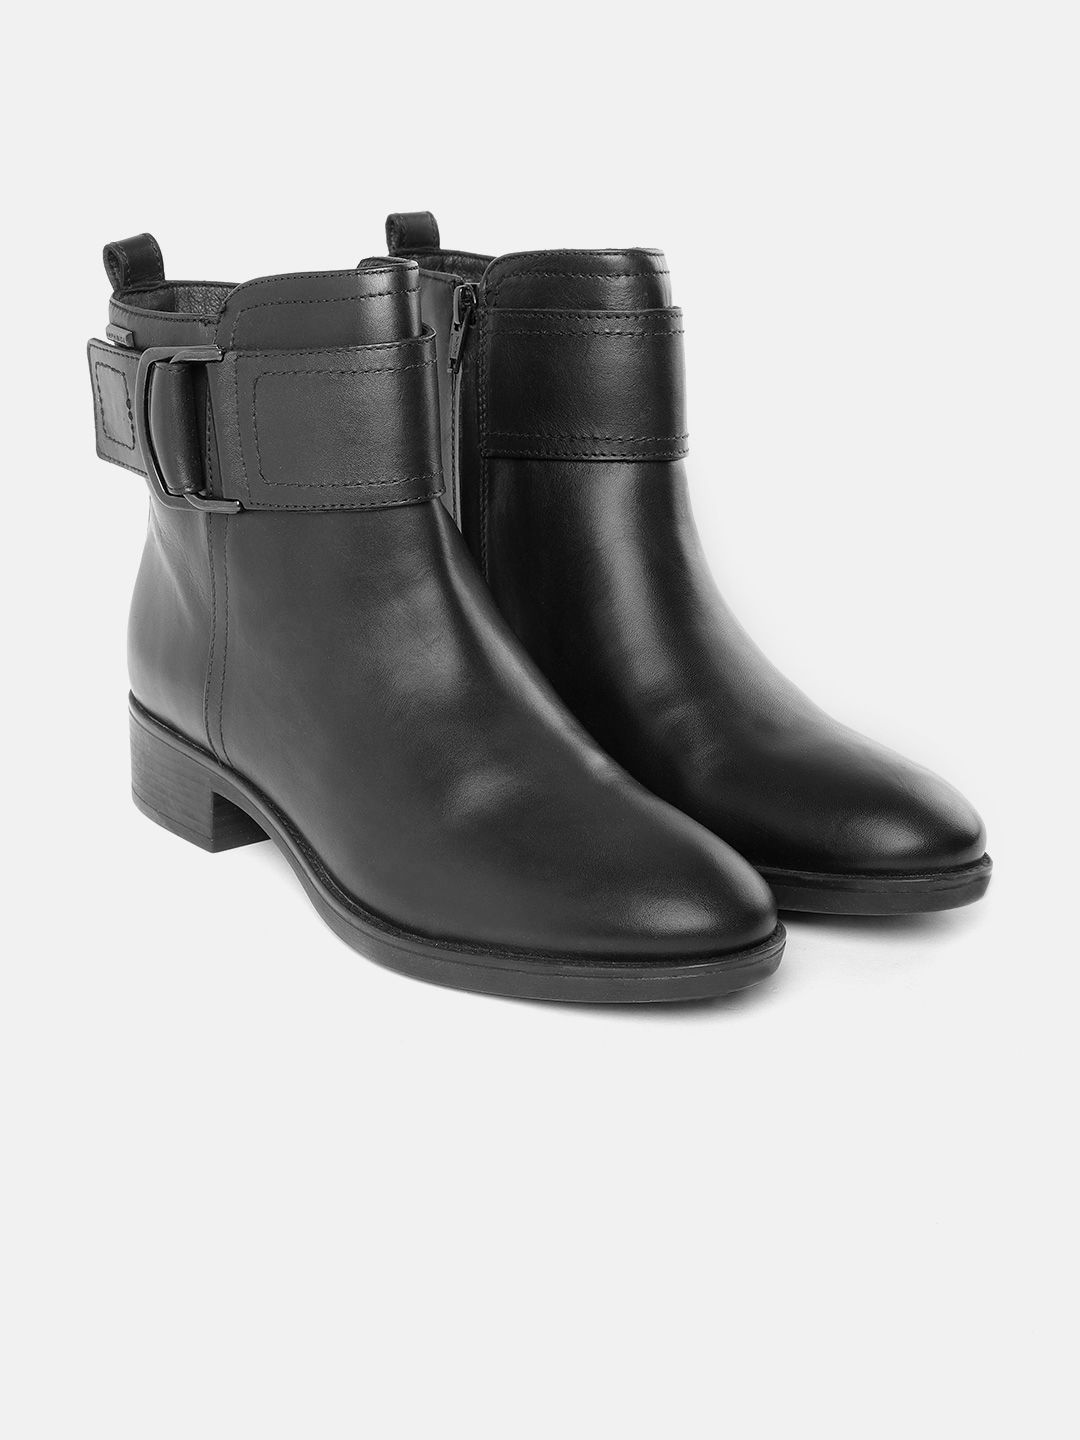 Geox Women Black Leather Heeled Boots Price in India